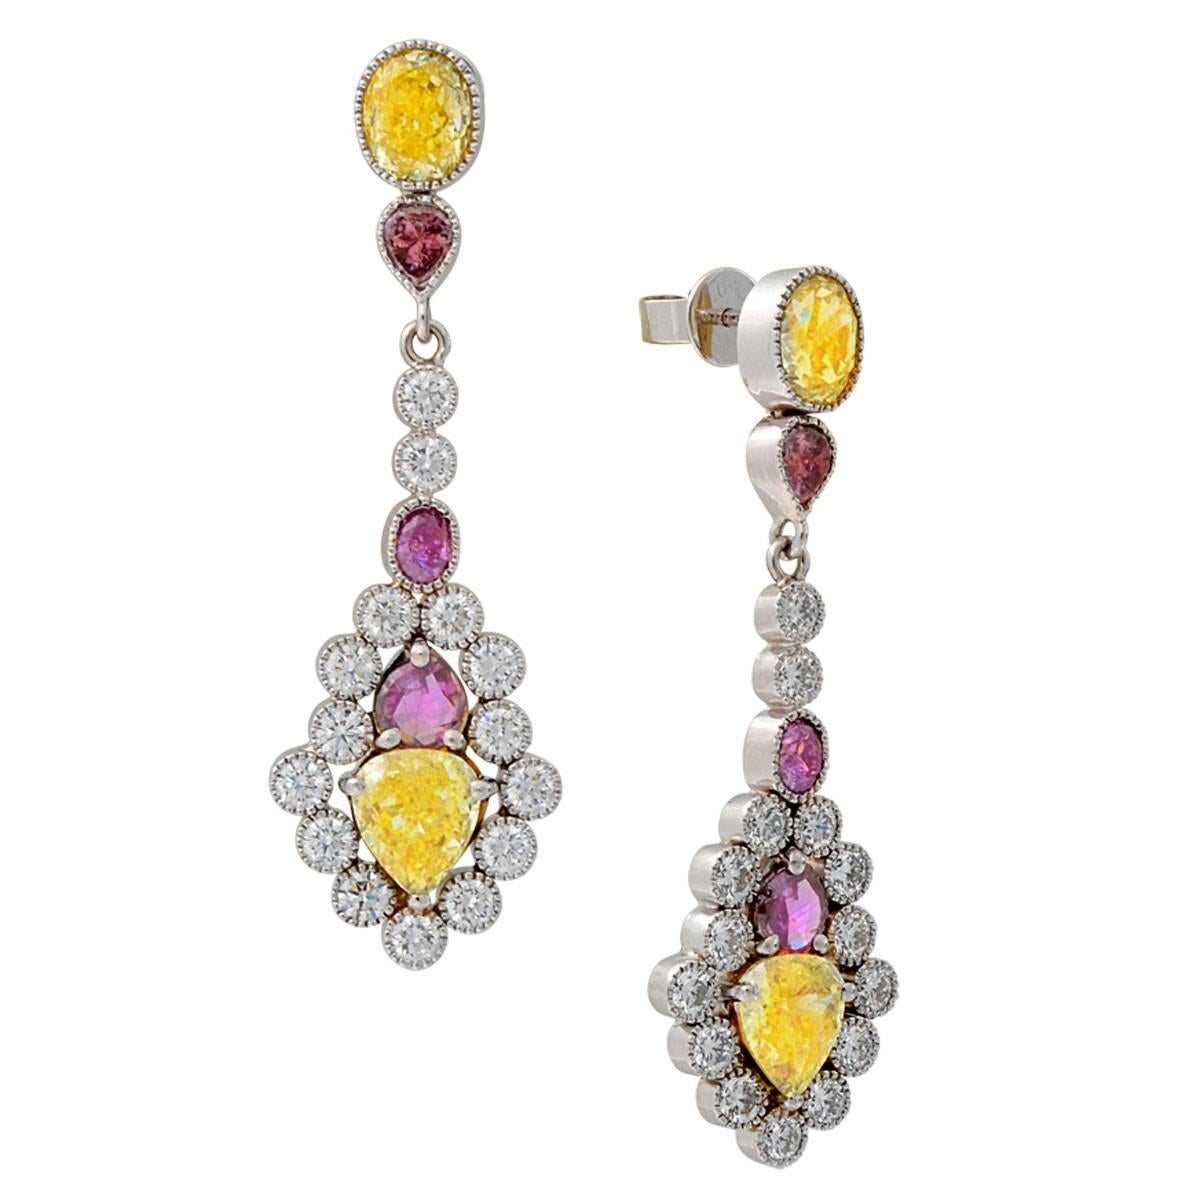 These amazing colorful diamond dangle earrings feature yellow, purple, and white natural diamonds. The 4.13 carats of natural fancy yellow and natural fancy light yellow diamonds all have GIA certificates. There are another 1.36 carats of natural